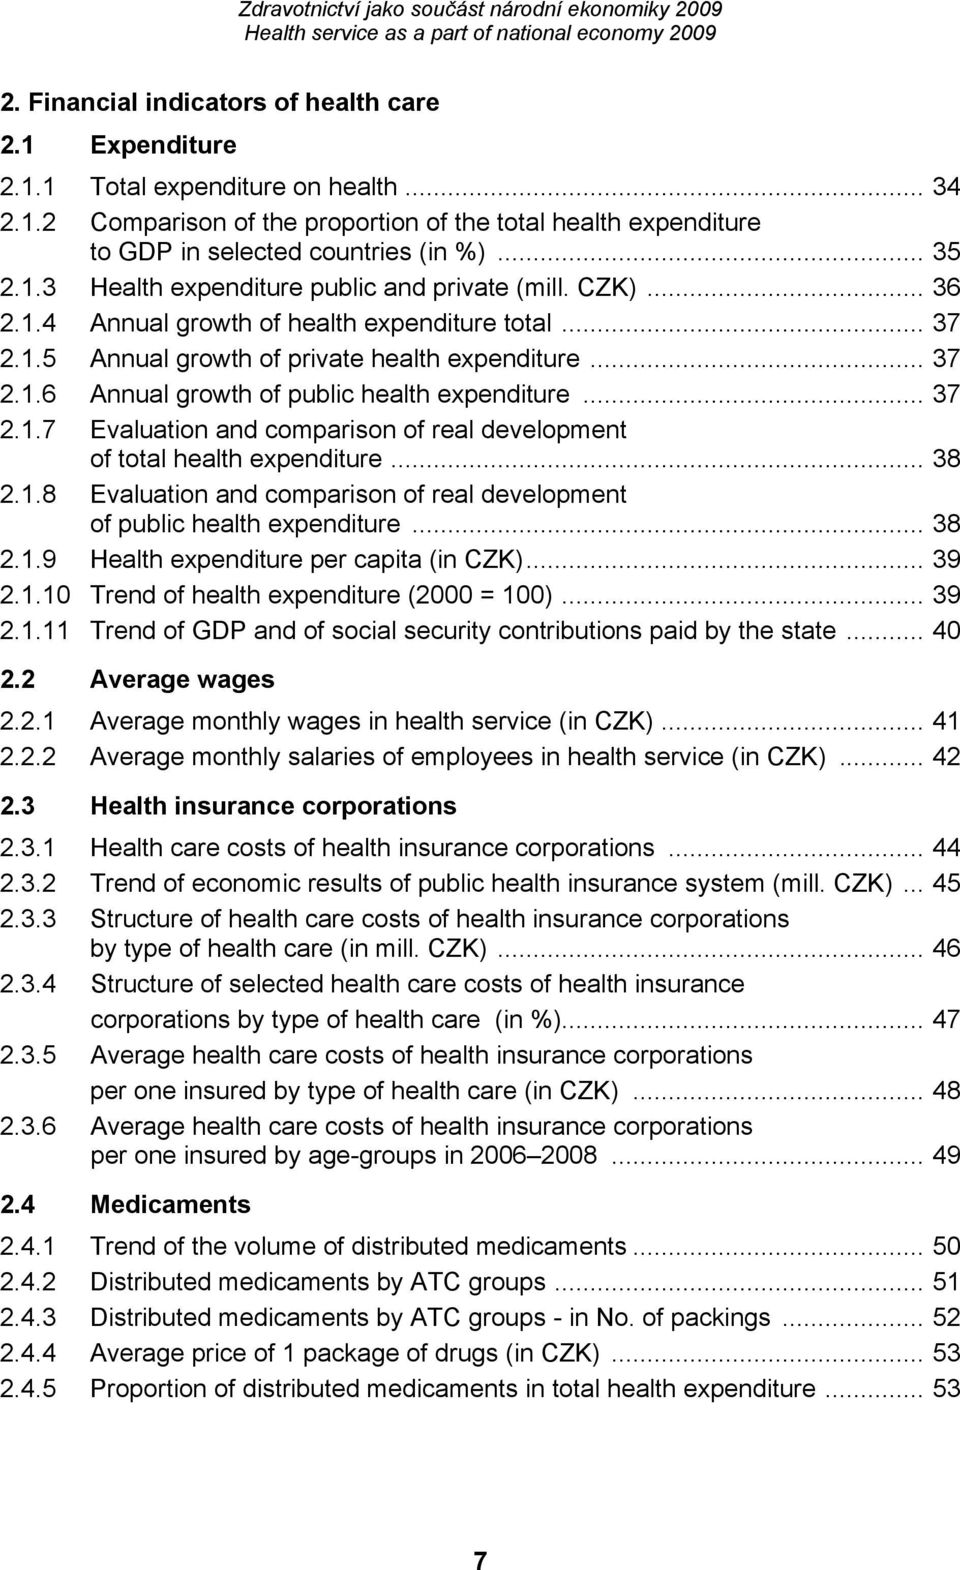 .. 37 2.1.7 Evaluation and comparison of real development of total health expenditure... 38 2.1.8 Evaluation and comparison of real development of public health expenditure... 38 2.1.9 Health expenditure per capita (in CZK).